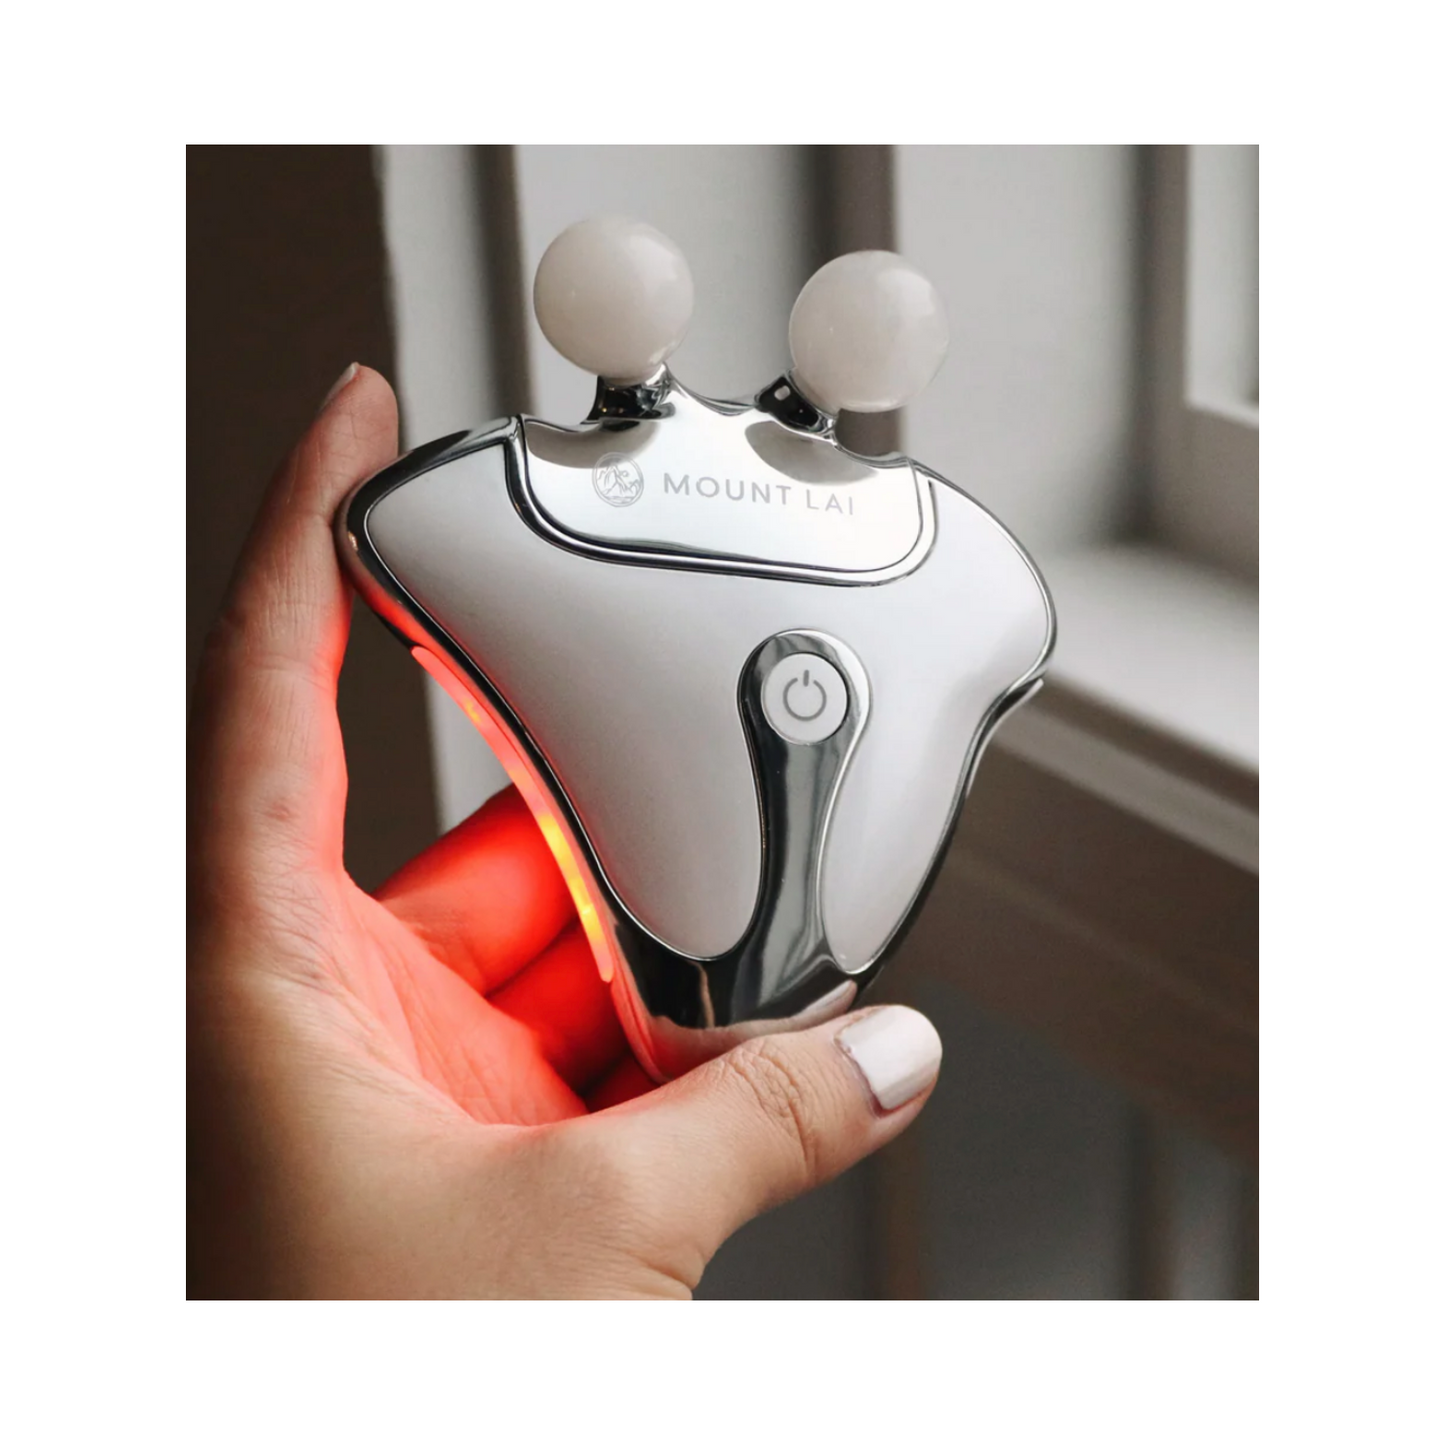 Mount Lai The Vitality Qi LED Gua Sha Device with Protective Pouch